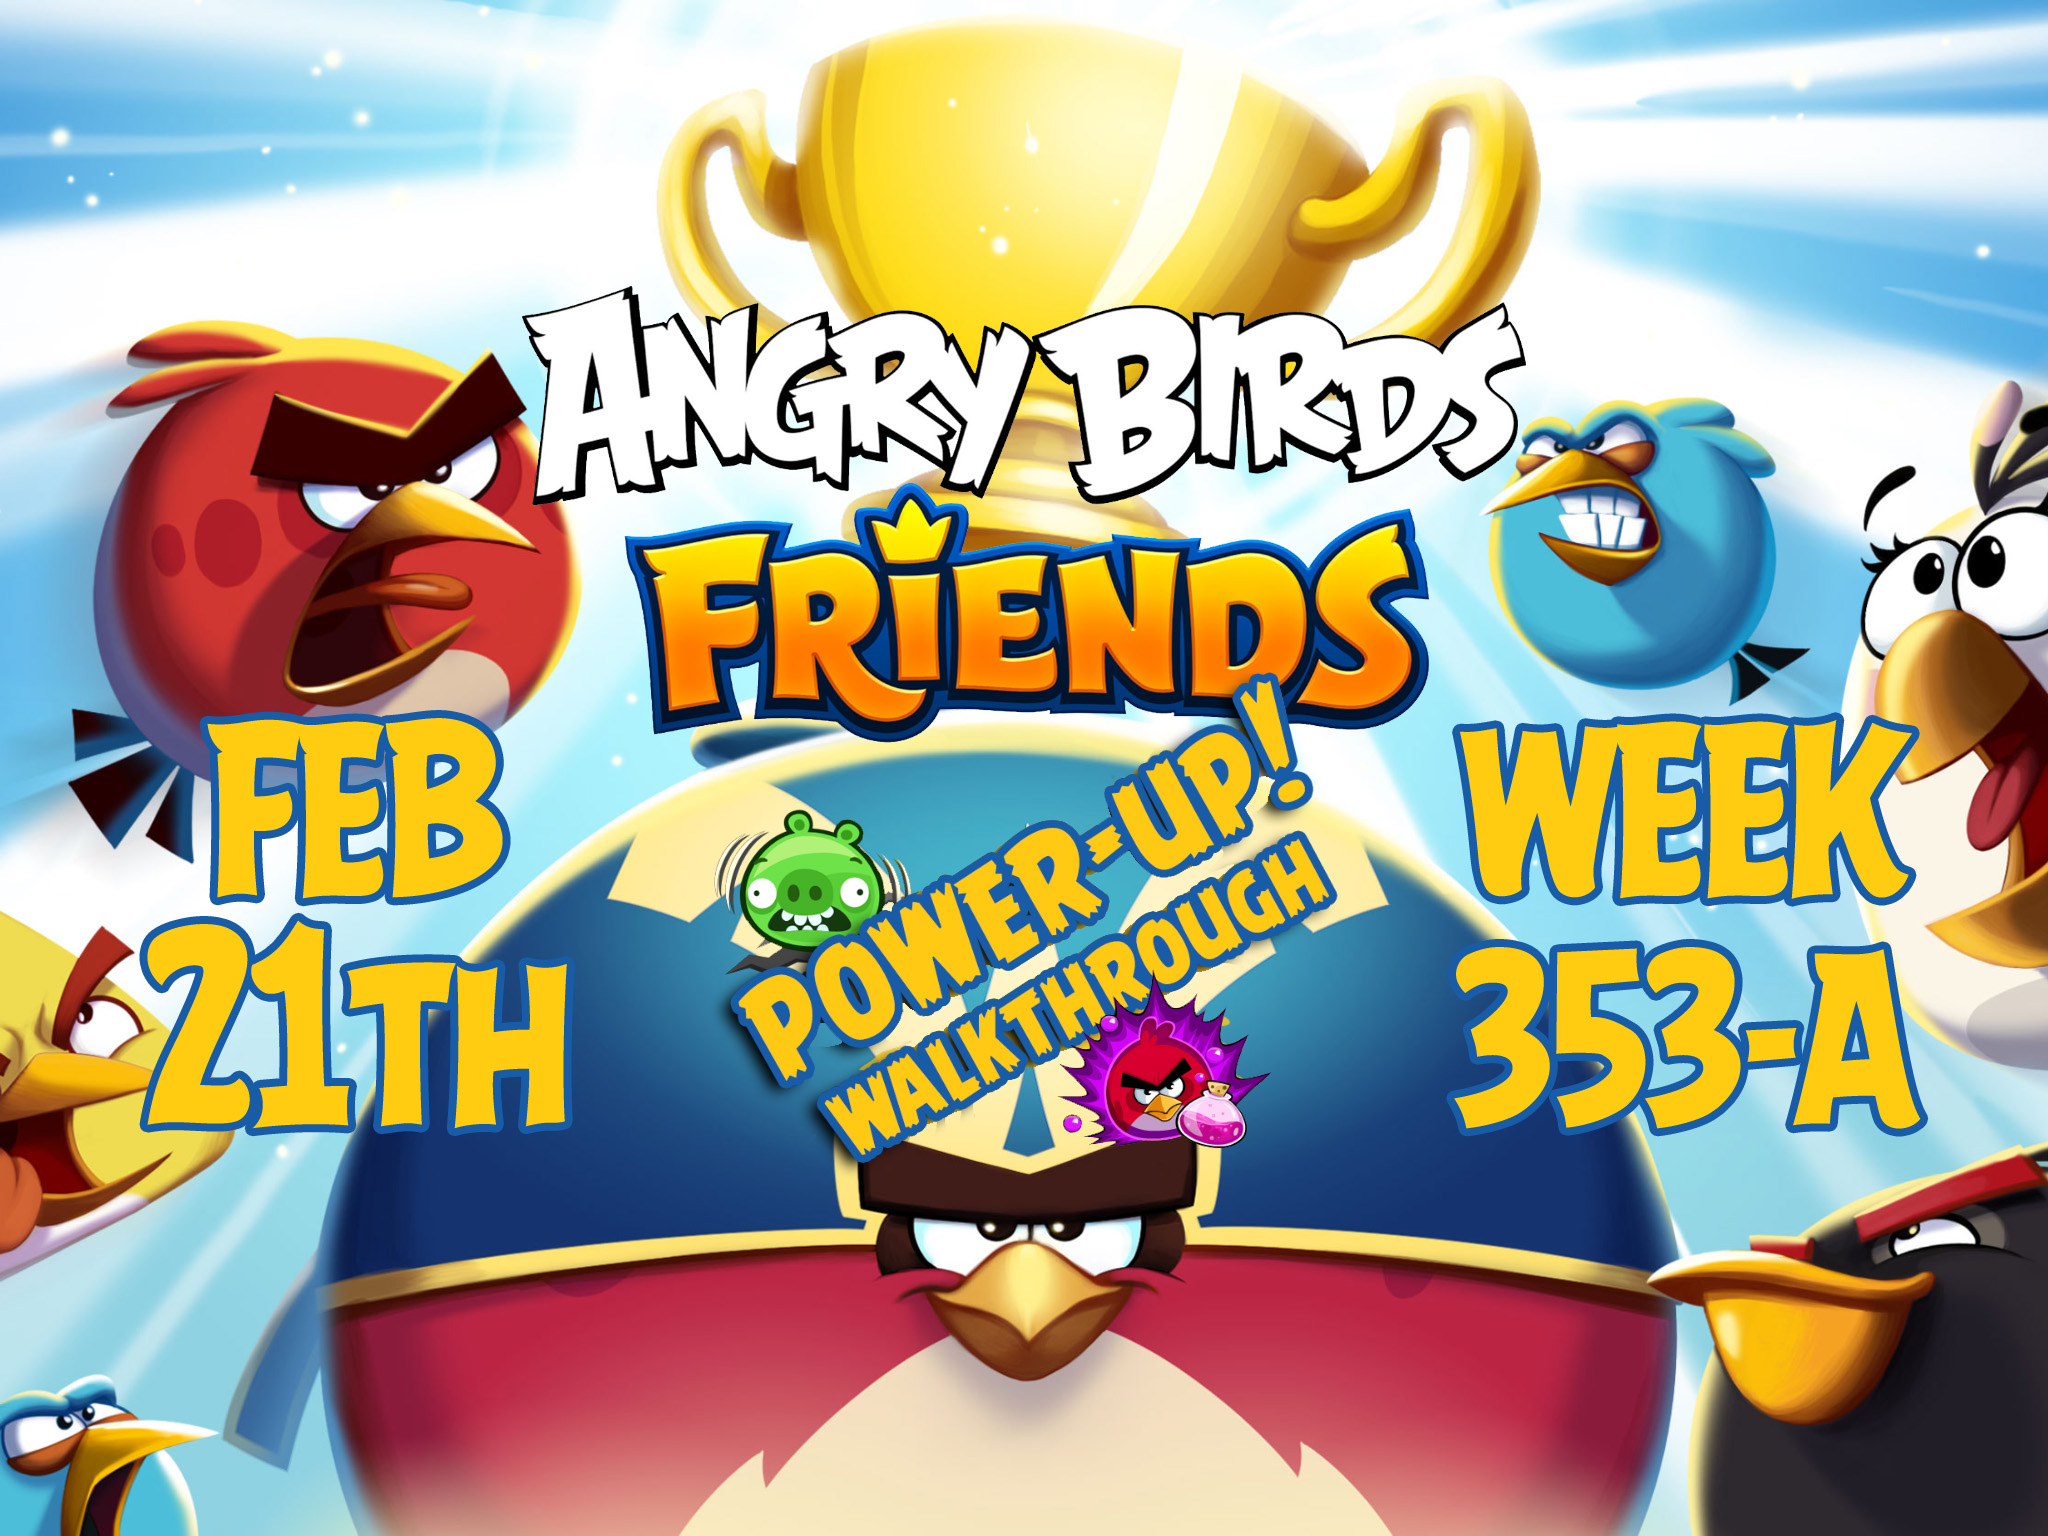 Angry-Birds-Friends-Tournament-Week-353 A-Feature-Image-PU